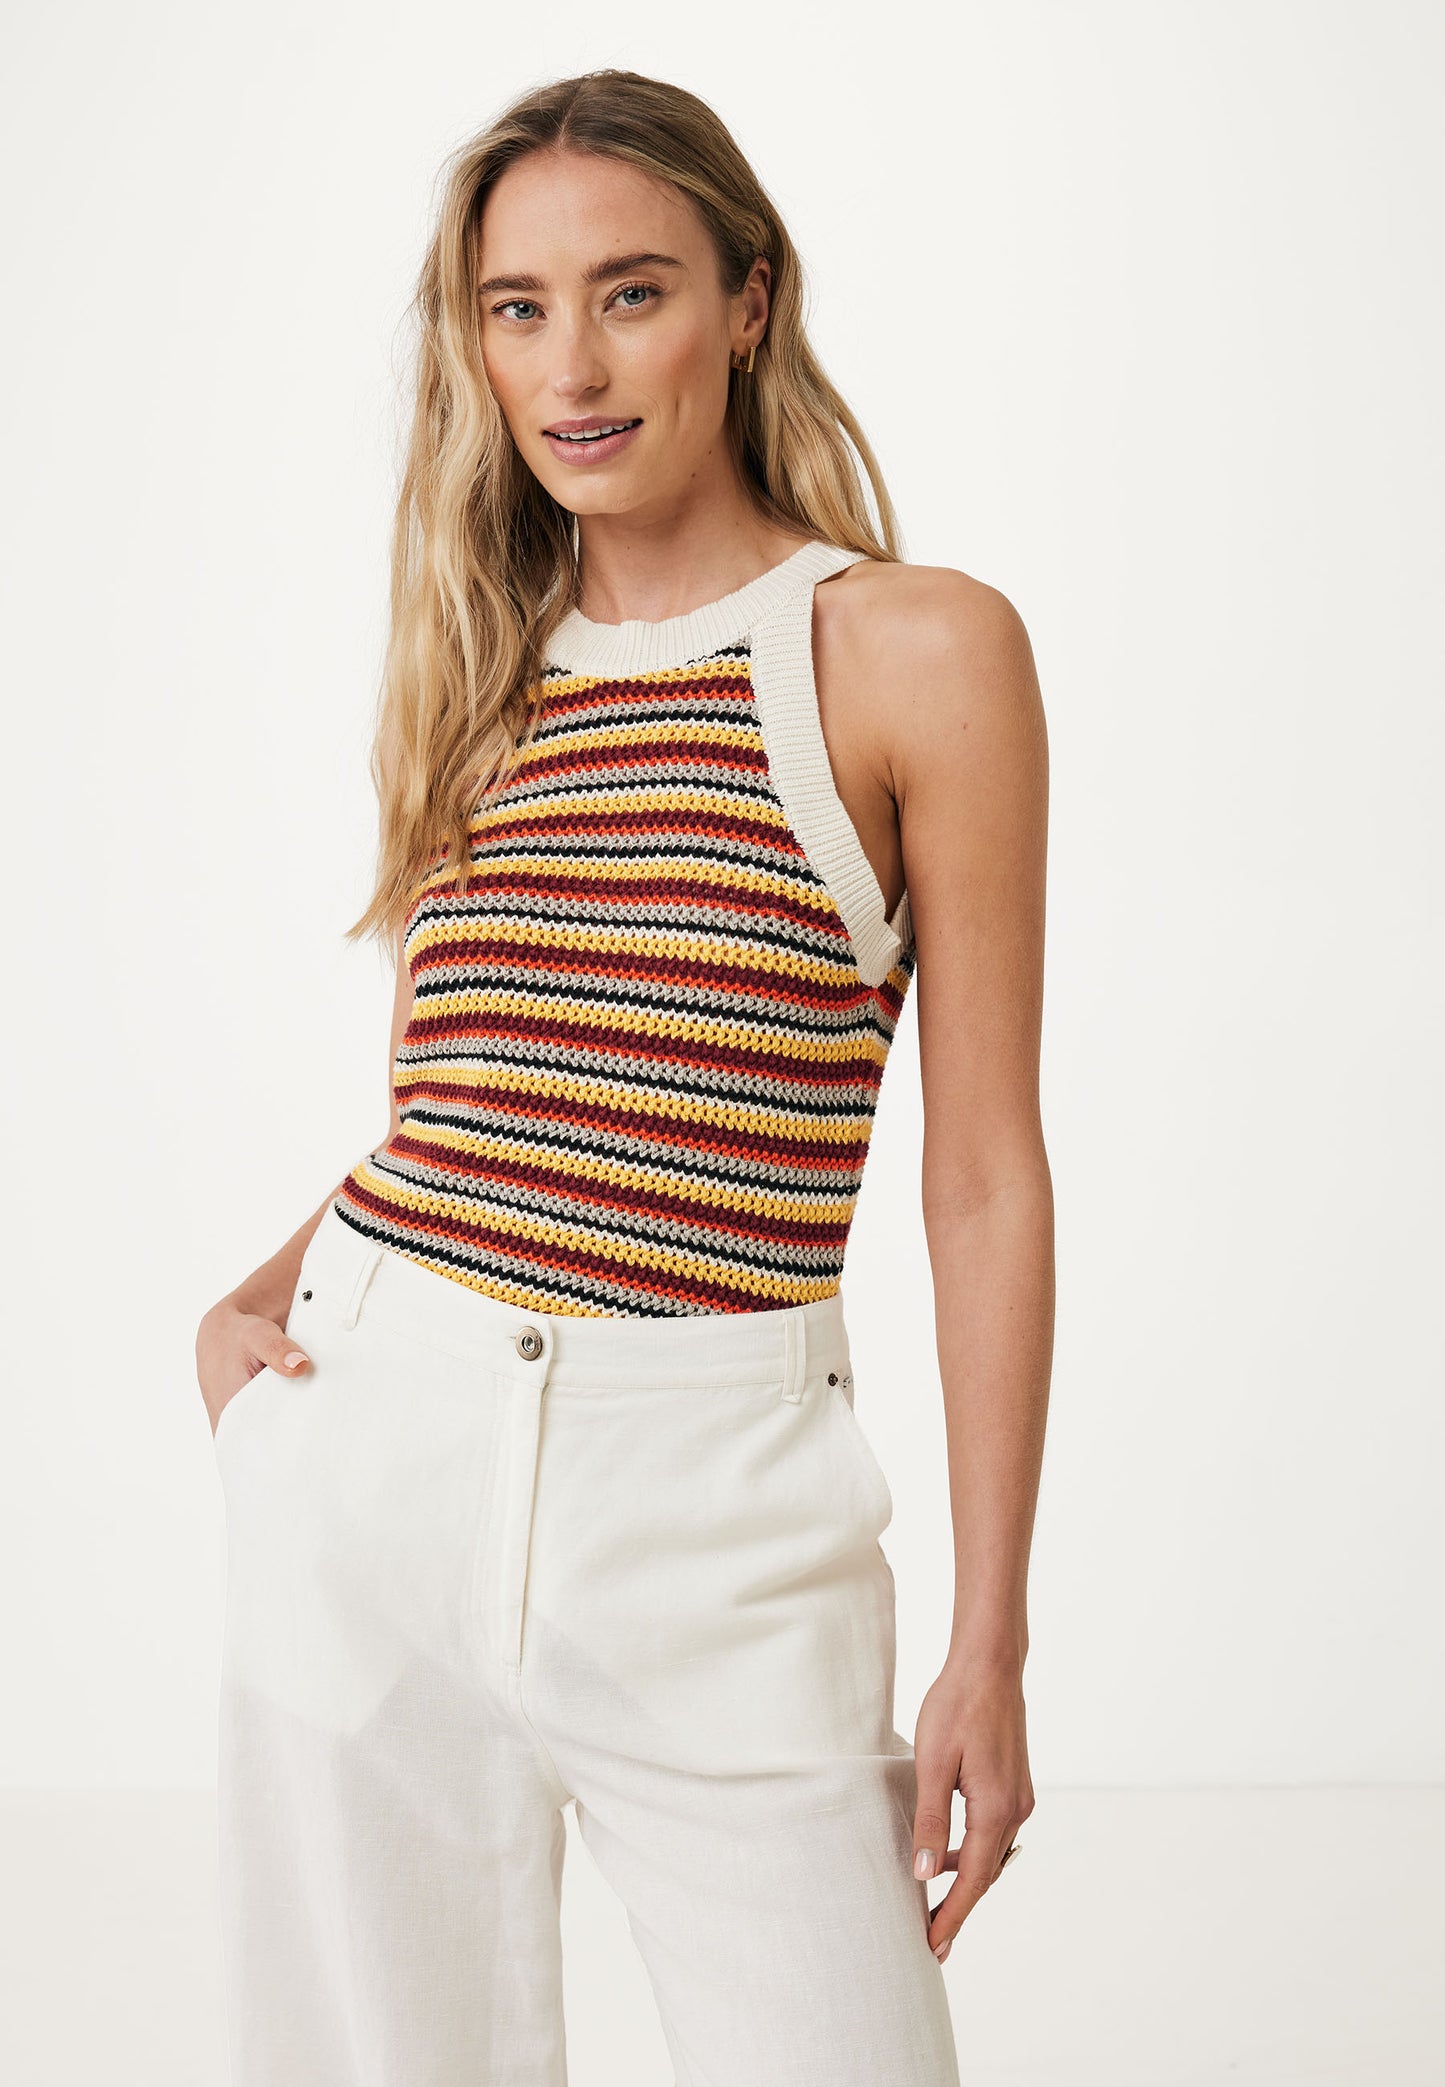 American Style Striped Top